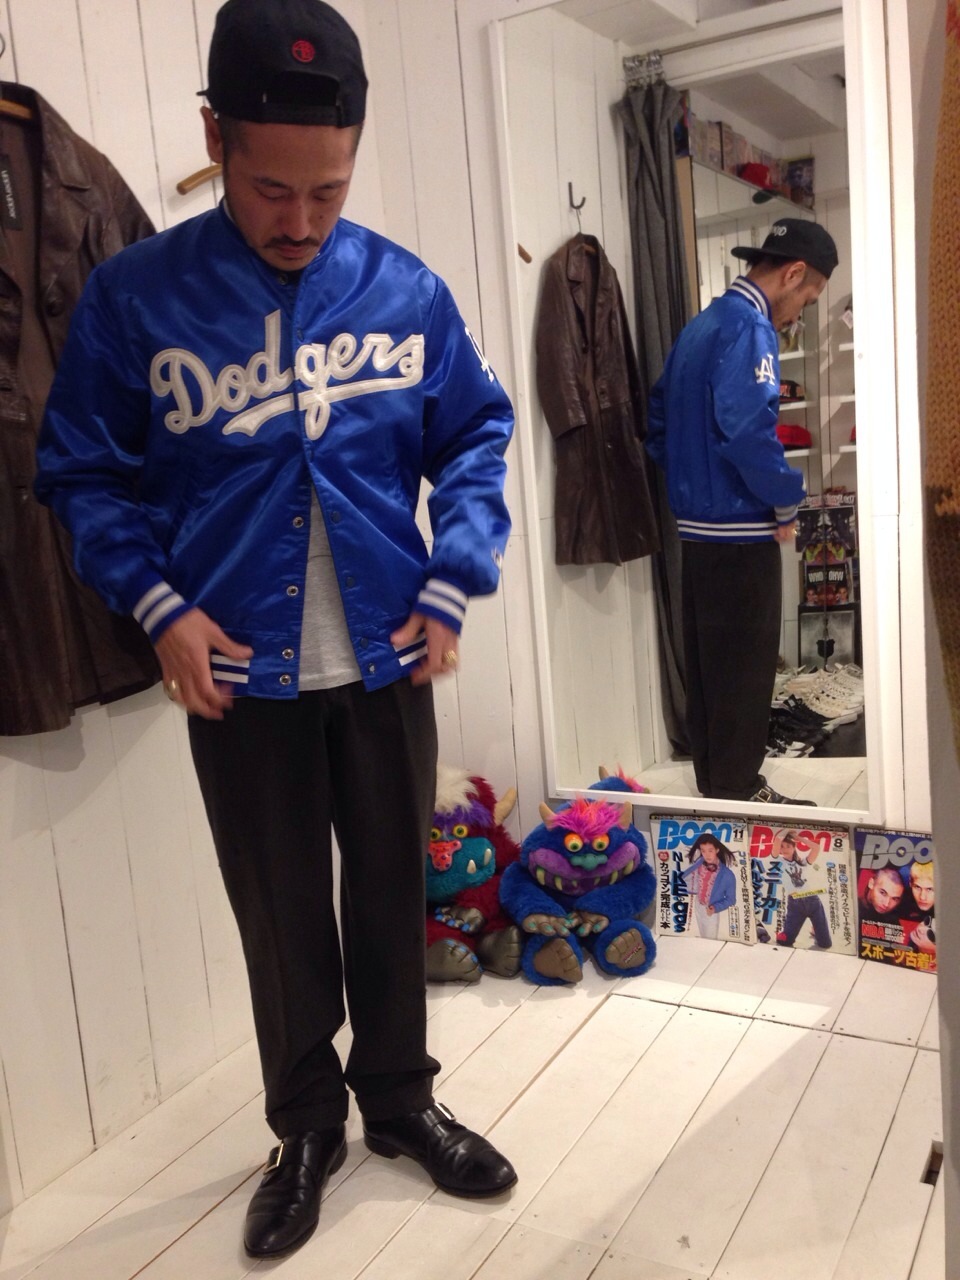 Dodgers style – upperupper